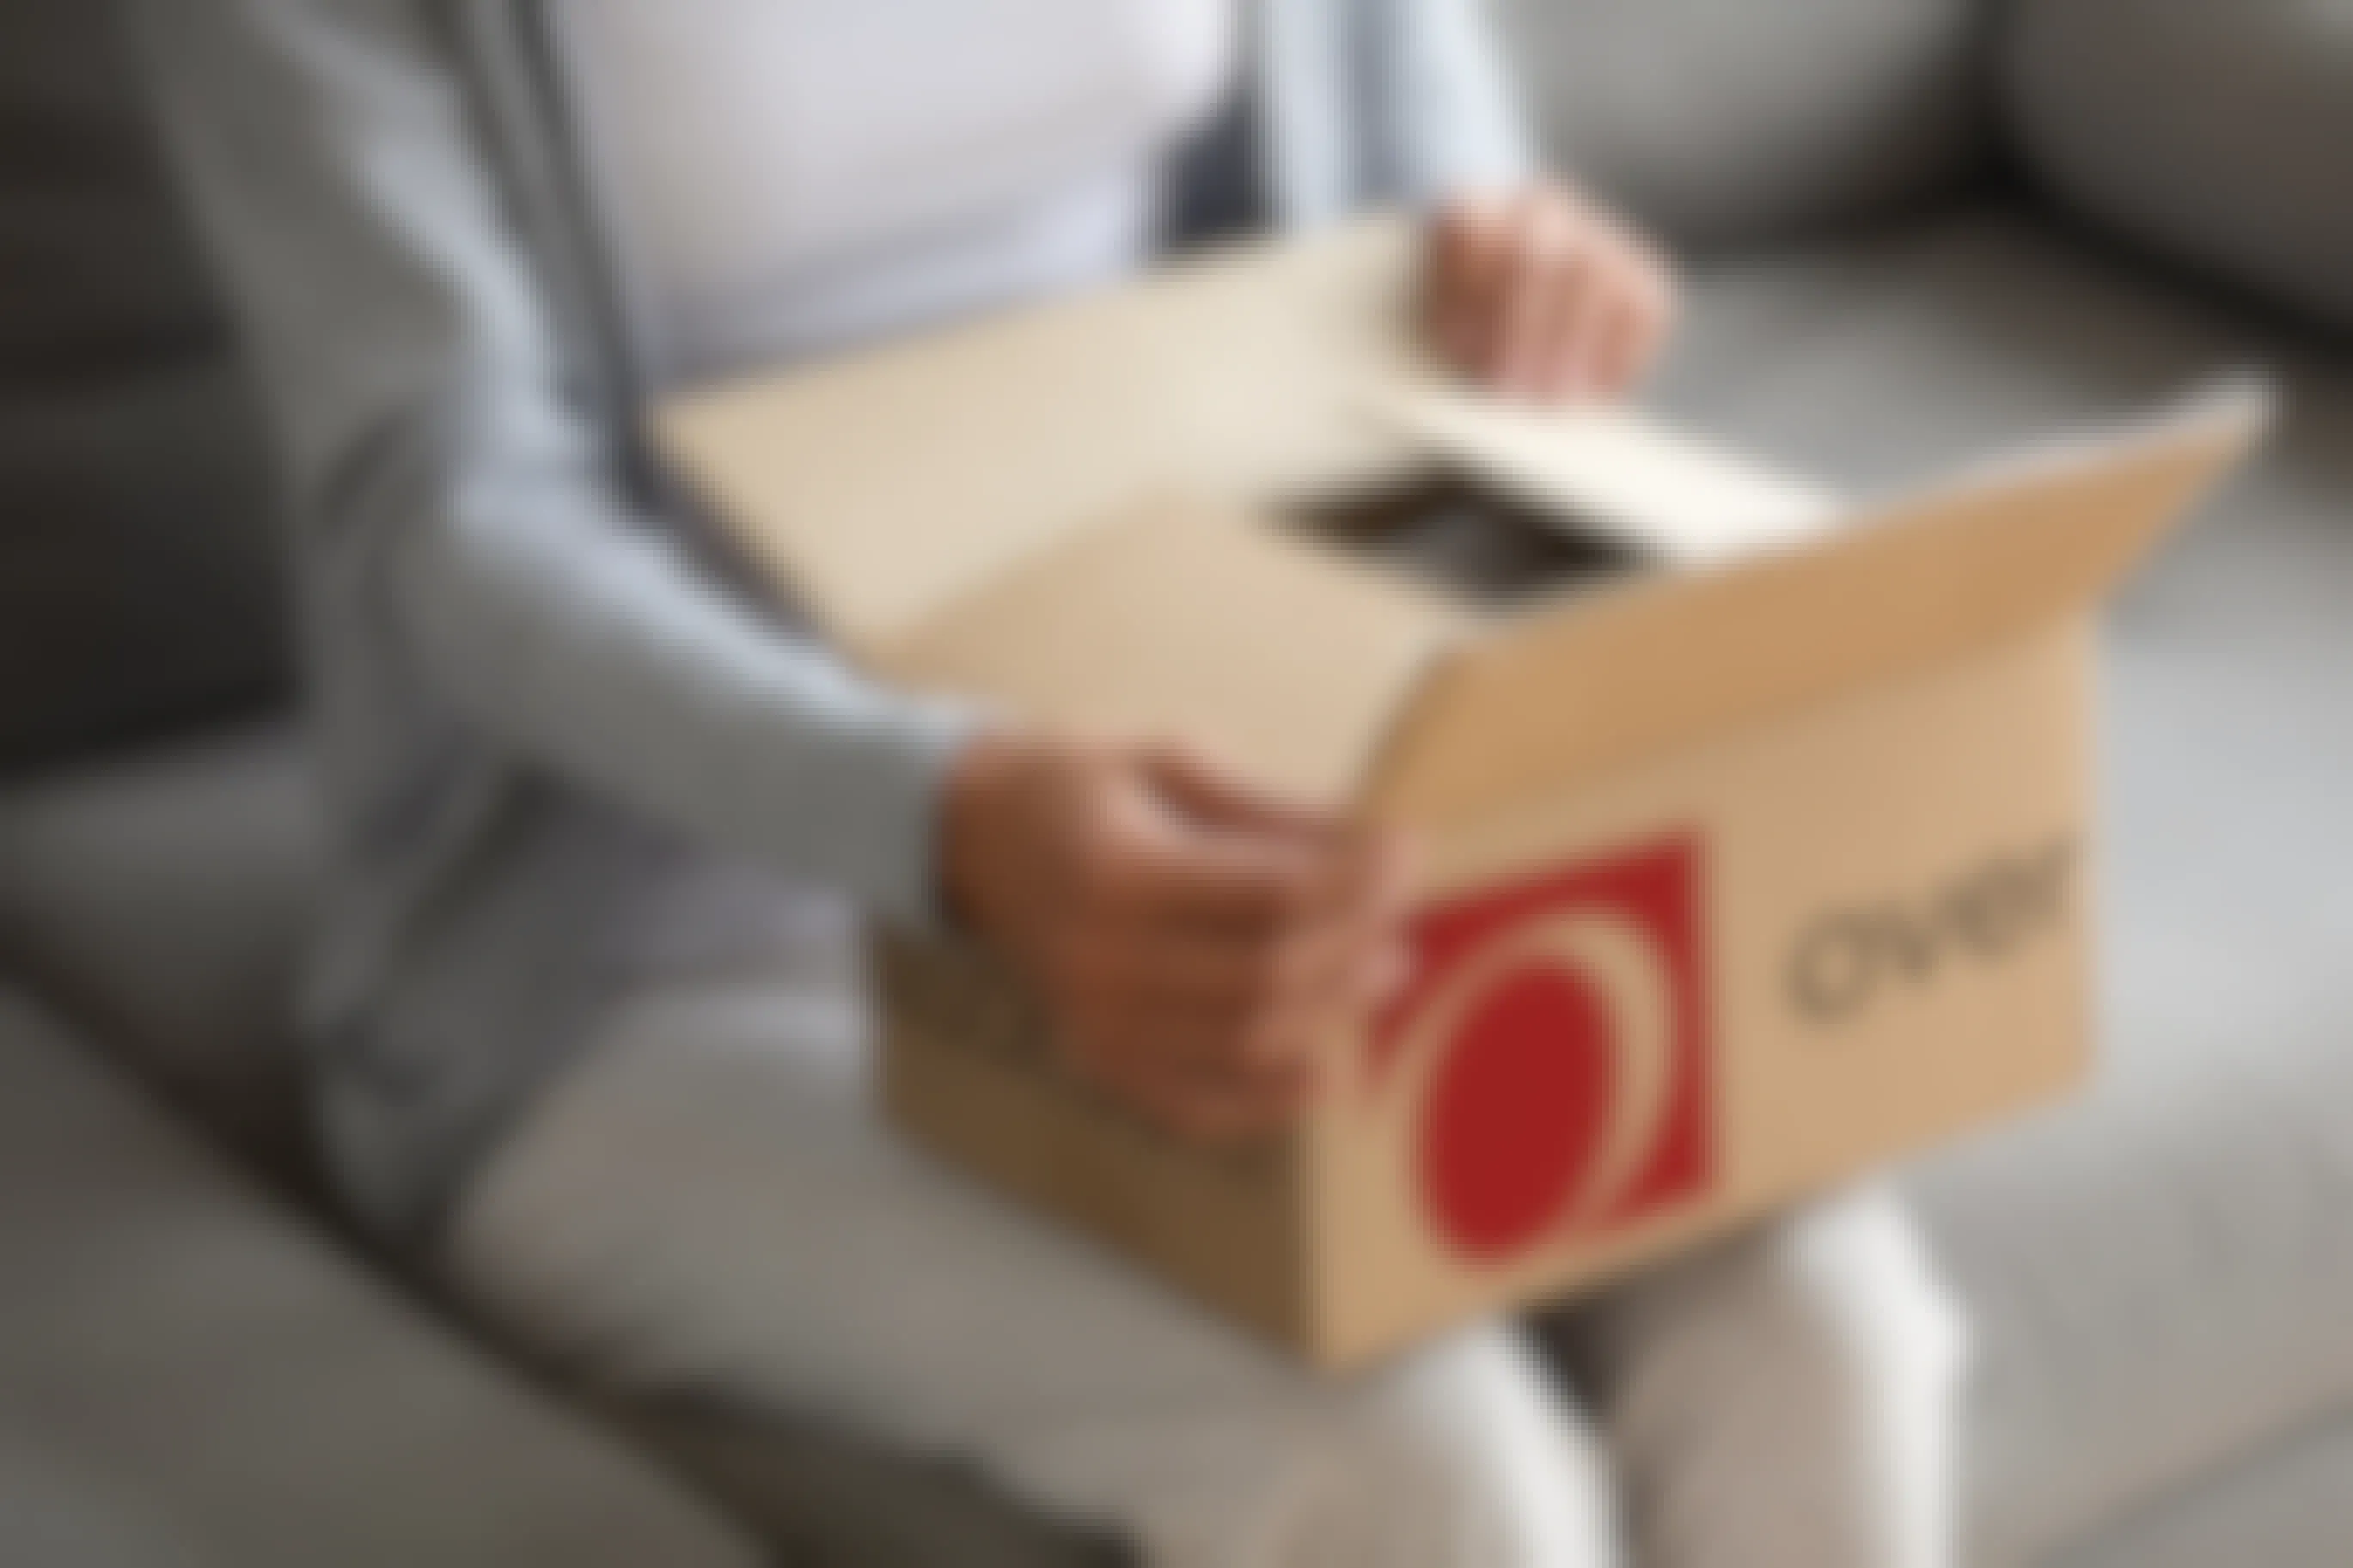 Someone opening a package from Overstock.com